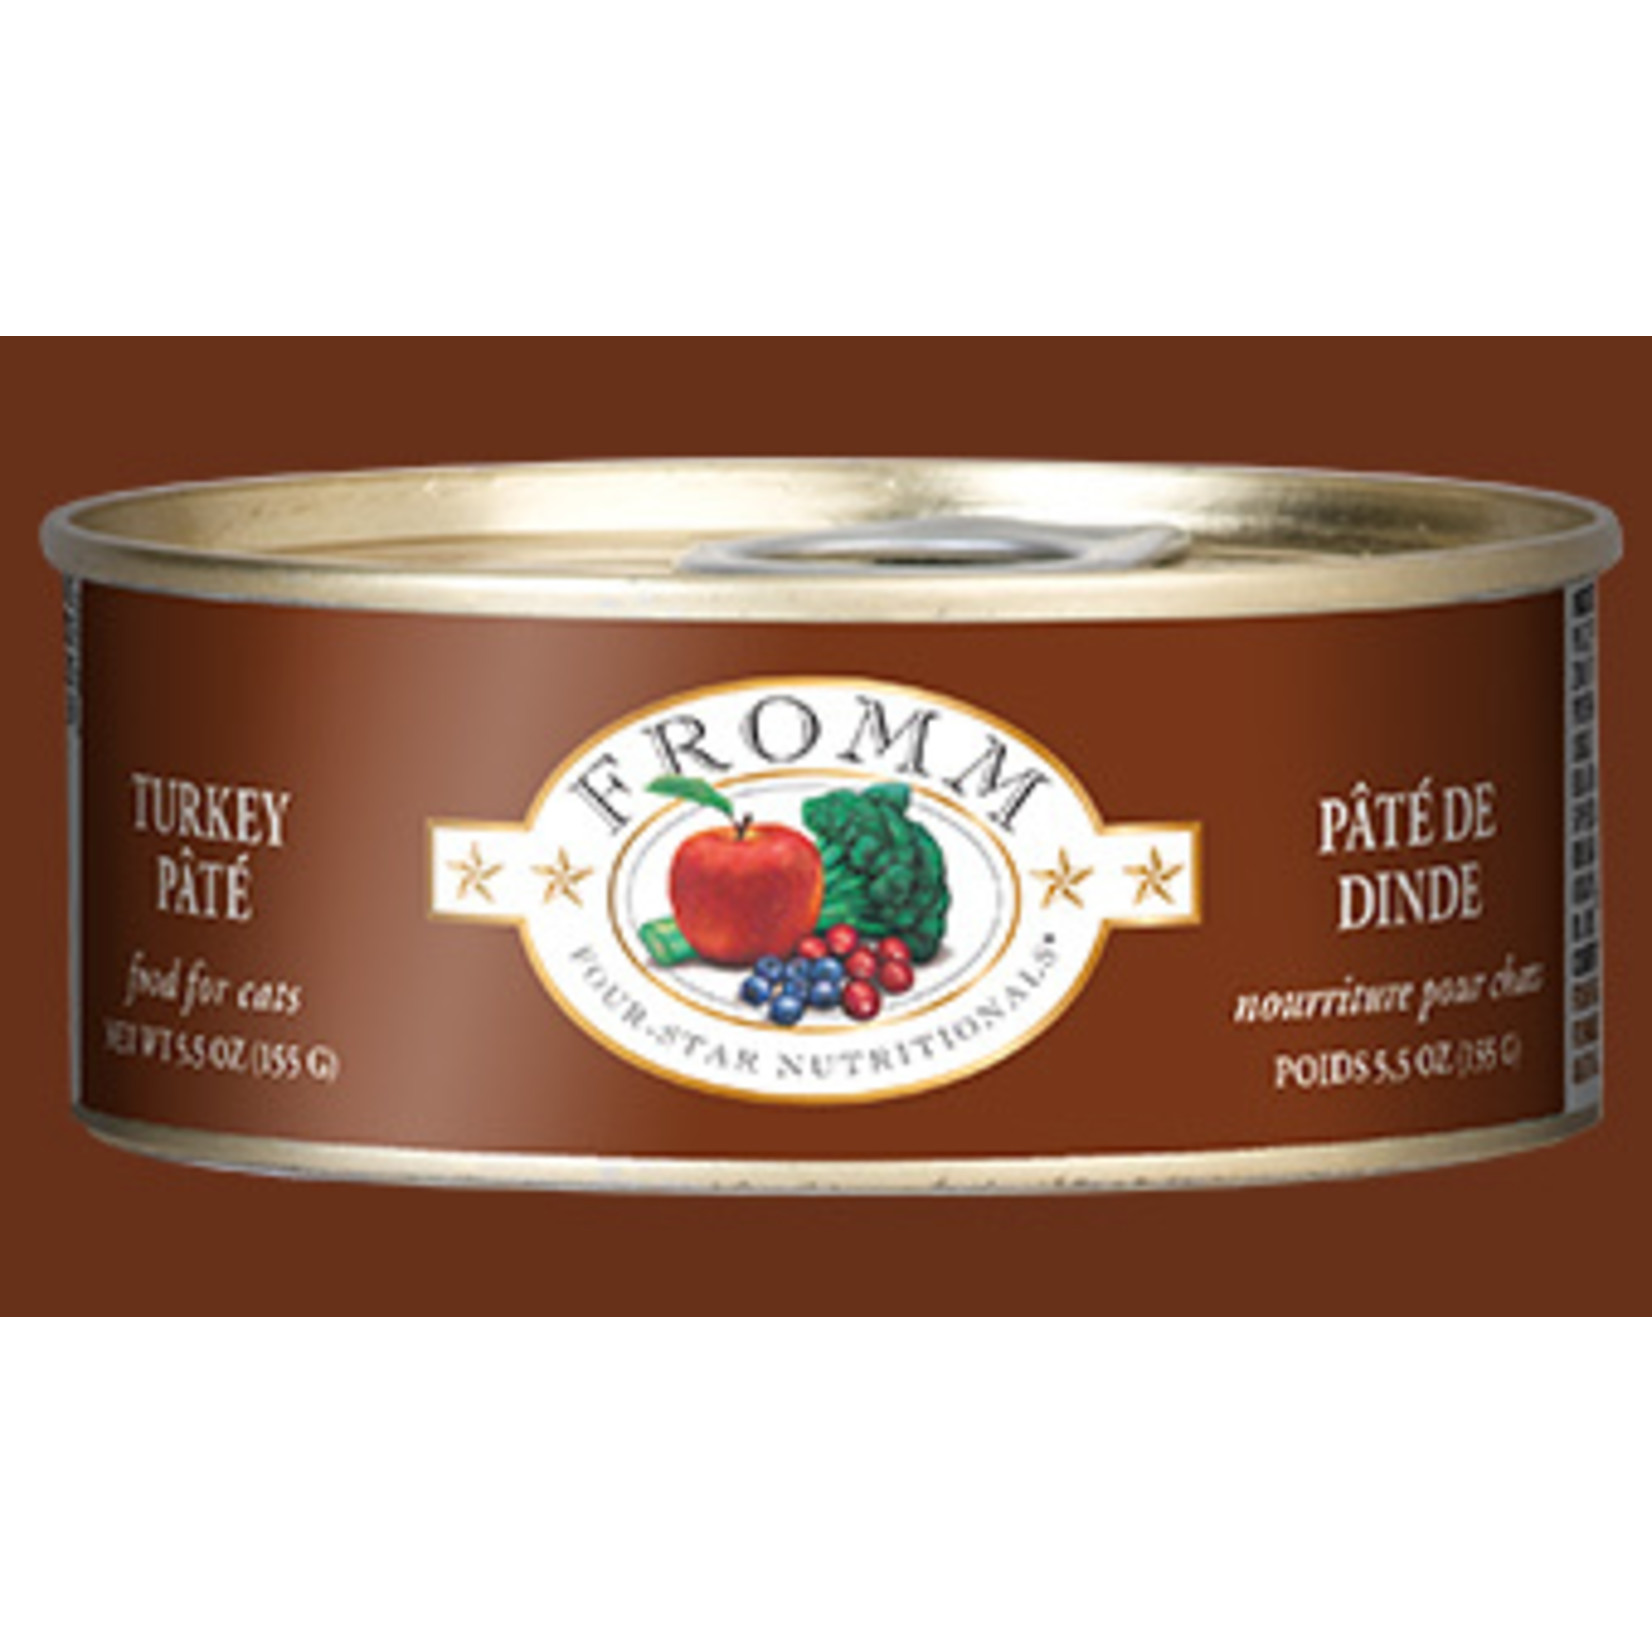 Fromm Fromm Wet Cat Food Four Star Nutritionals Turkey Pate 5.5oz Can